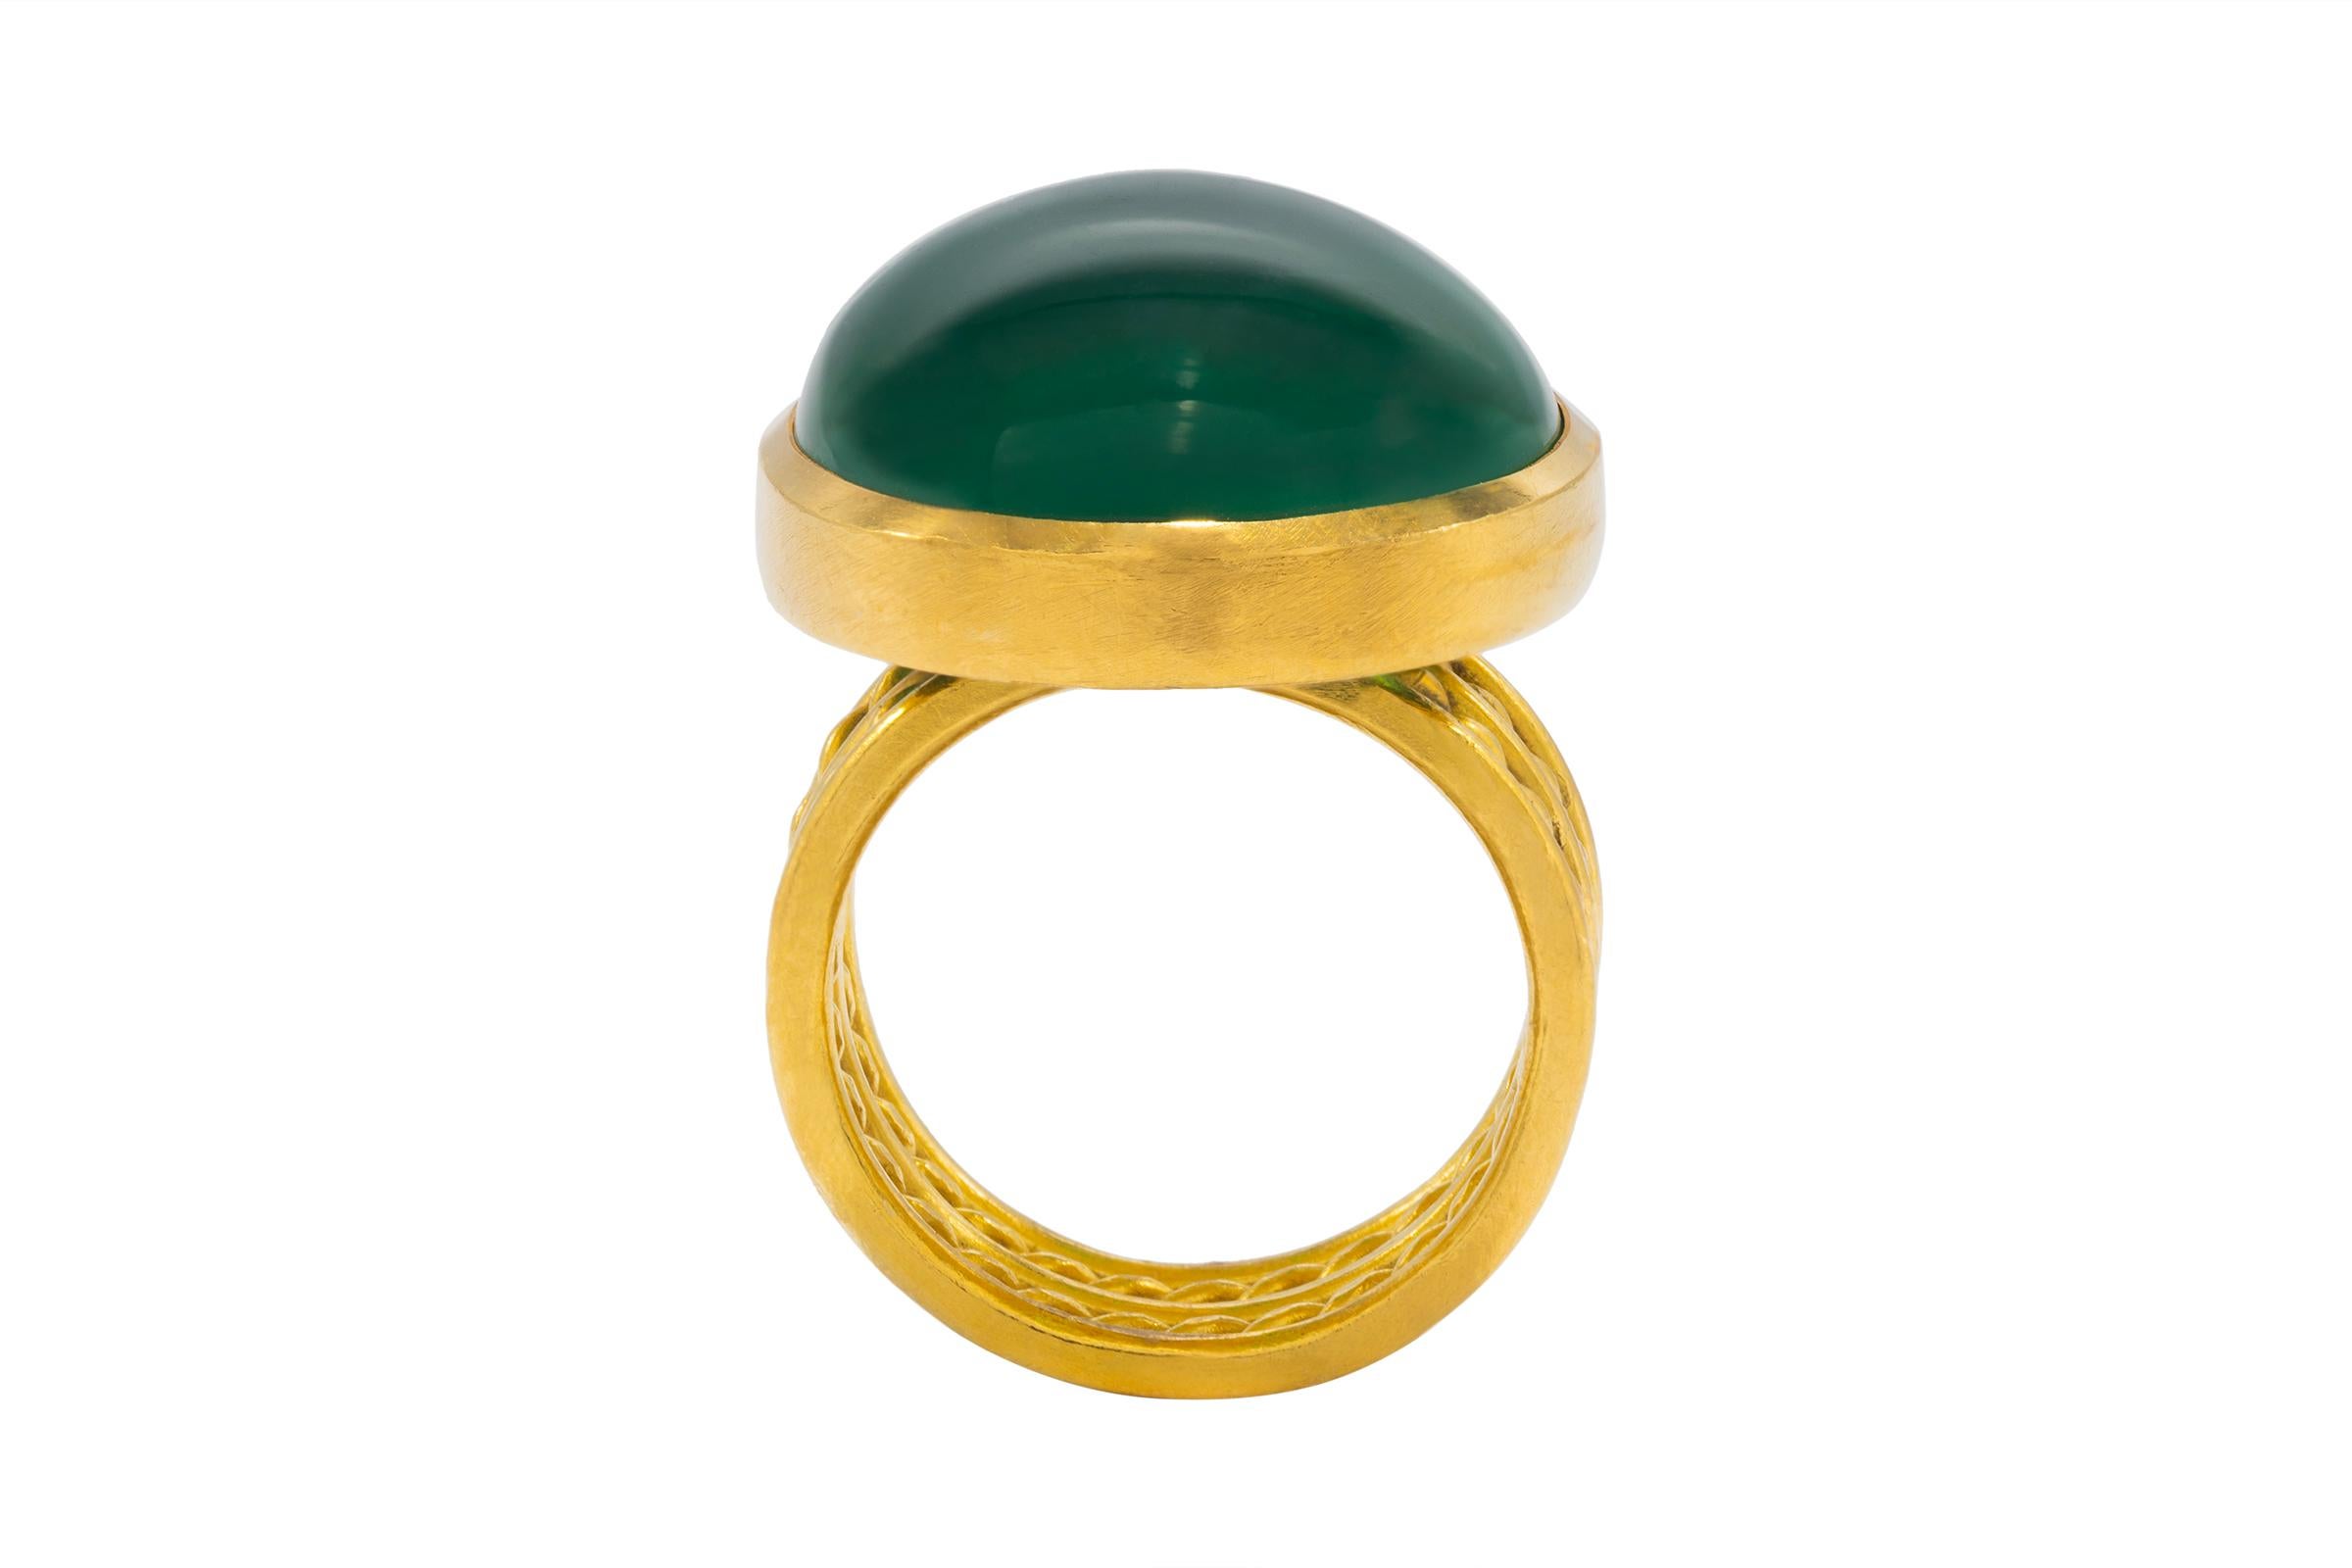 Artisan Green Agate Cocktail Ring in 22k Gold by Tagili